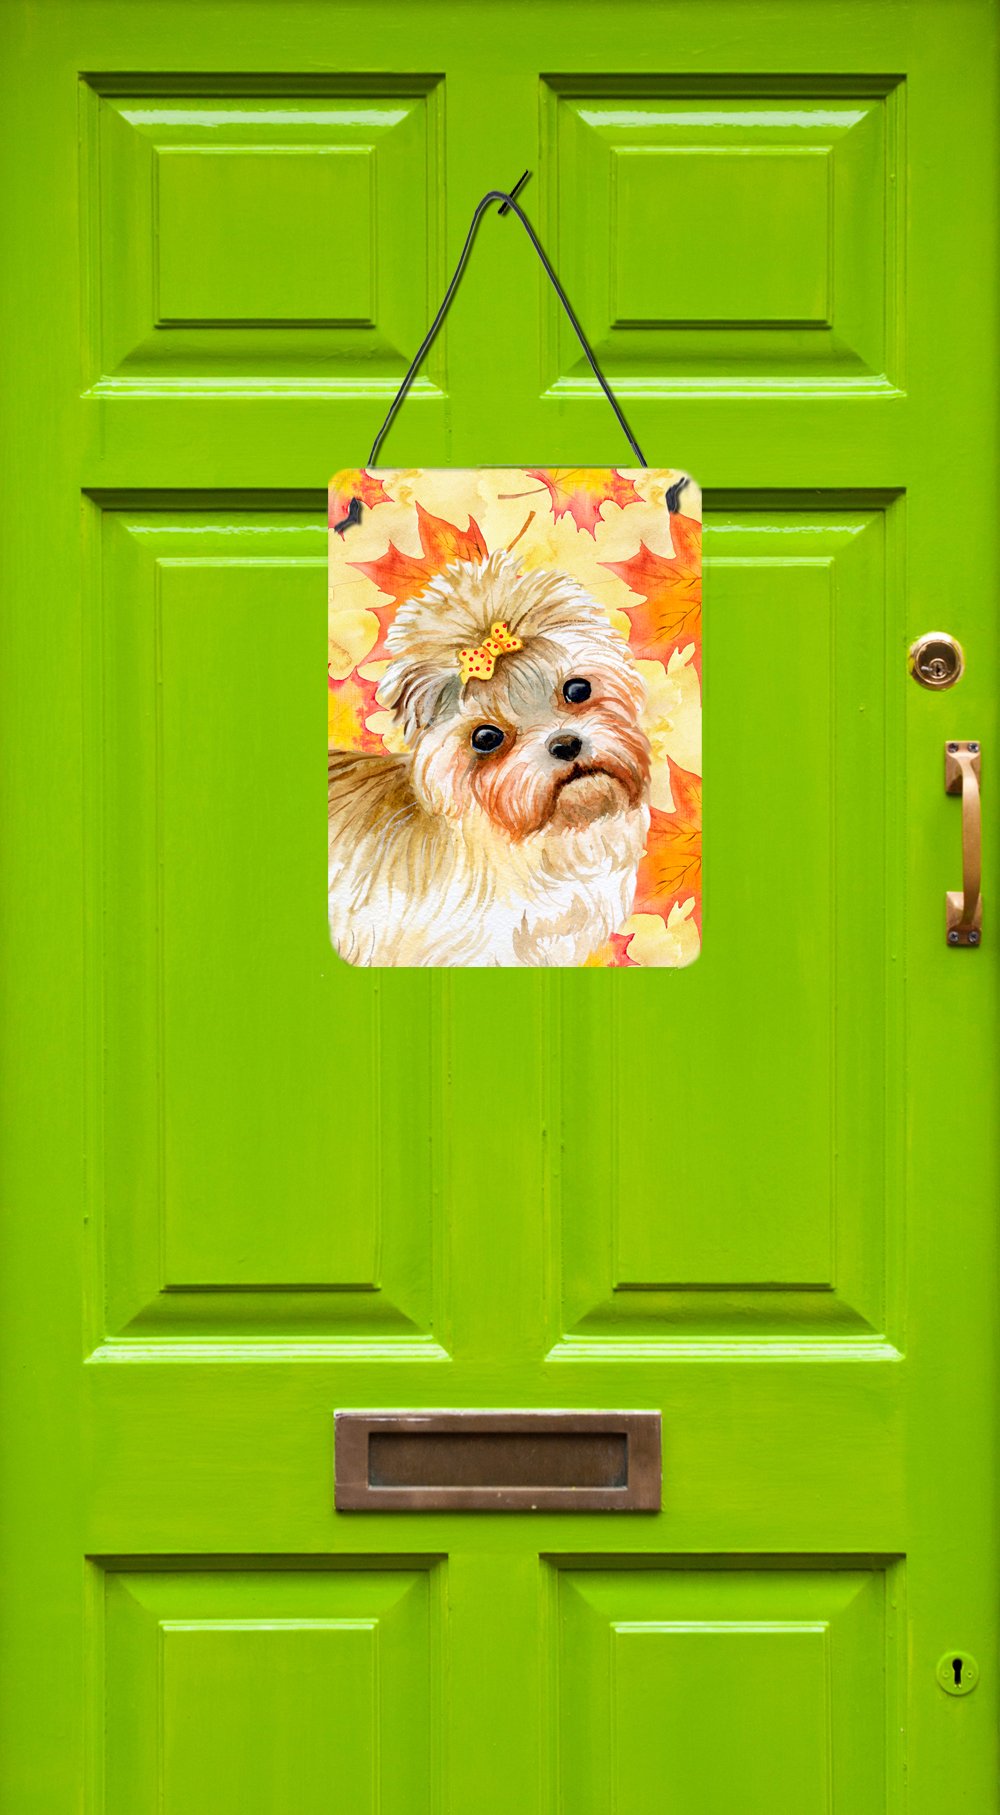 Morkie Fall Wall or Door Hanging Prints BB9929DS1216 by Caroline's Treasures